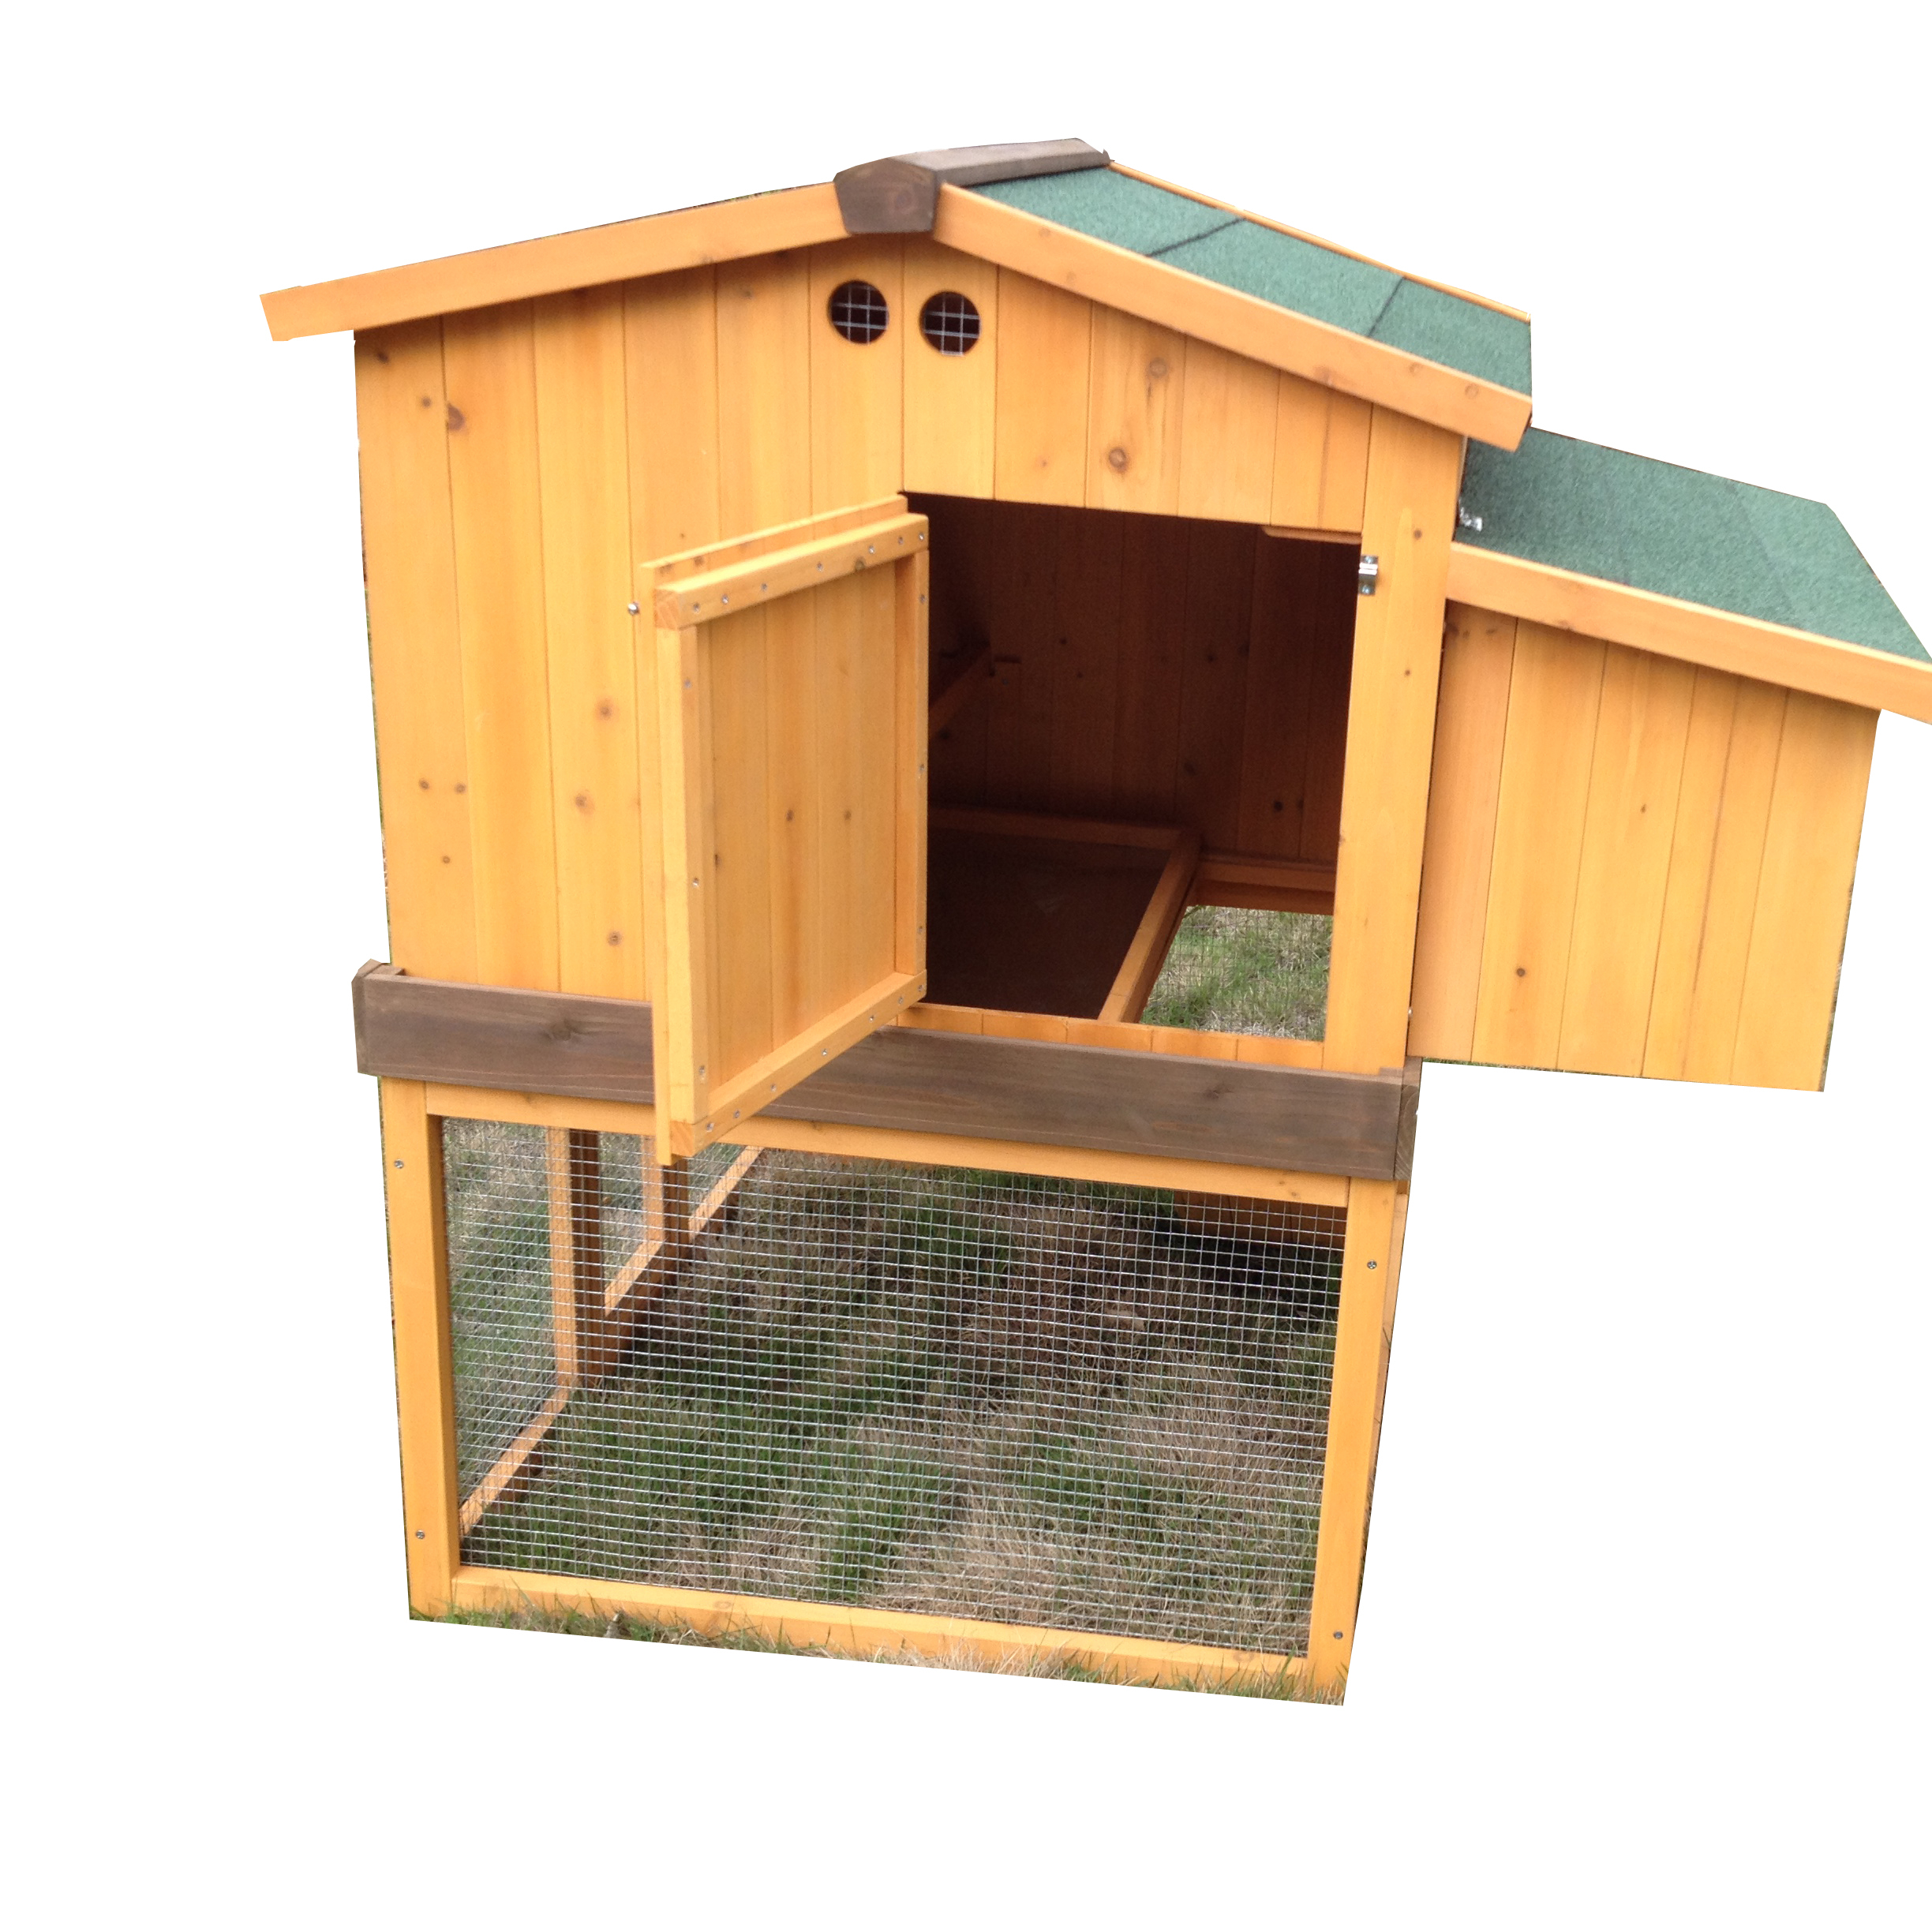 Factory made hot-sale Wood Shed -
 High Quality Flat Pack Wooden egg laying Chicken House coop – Easy